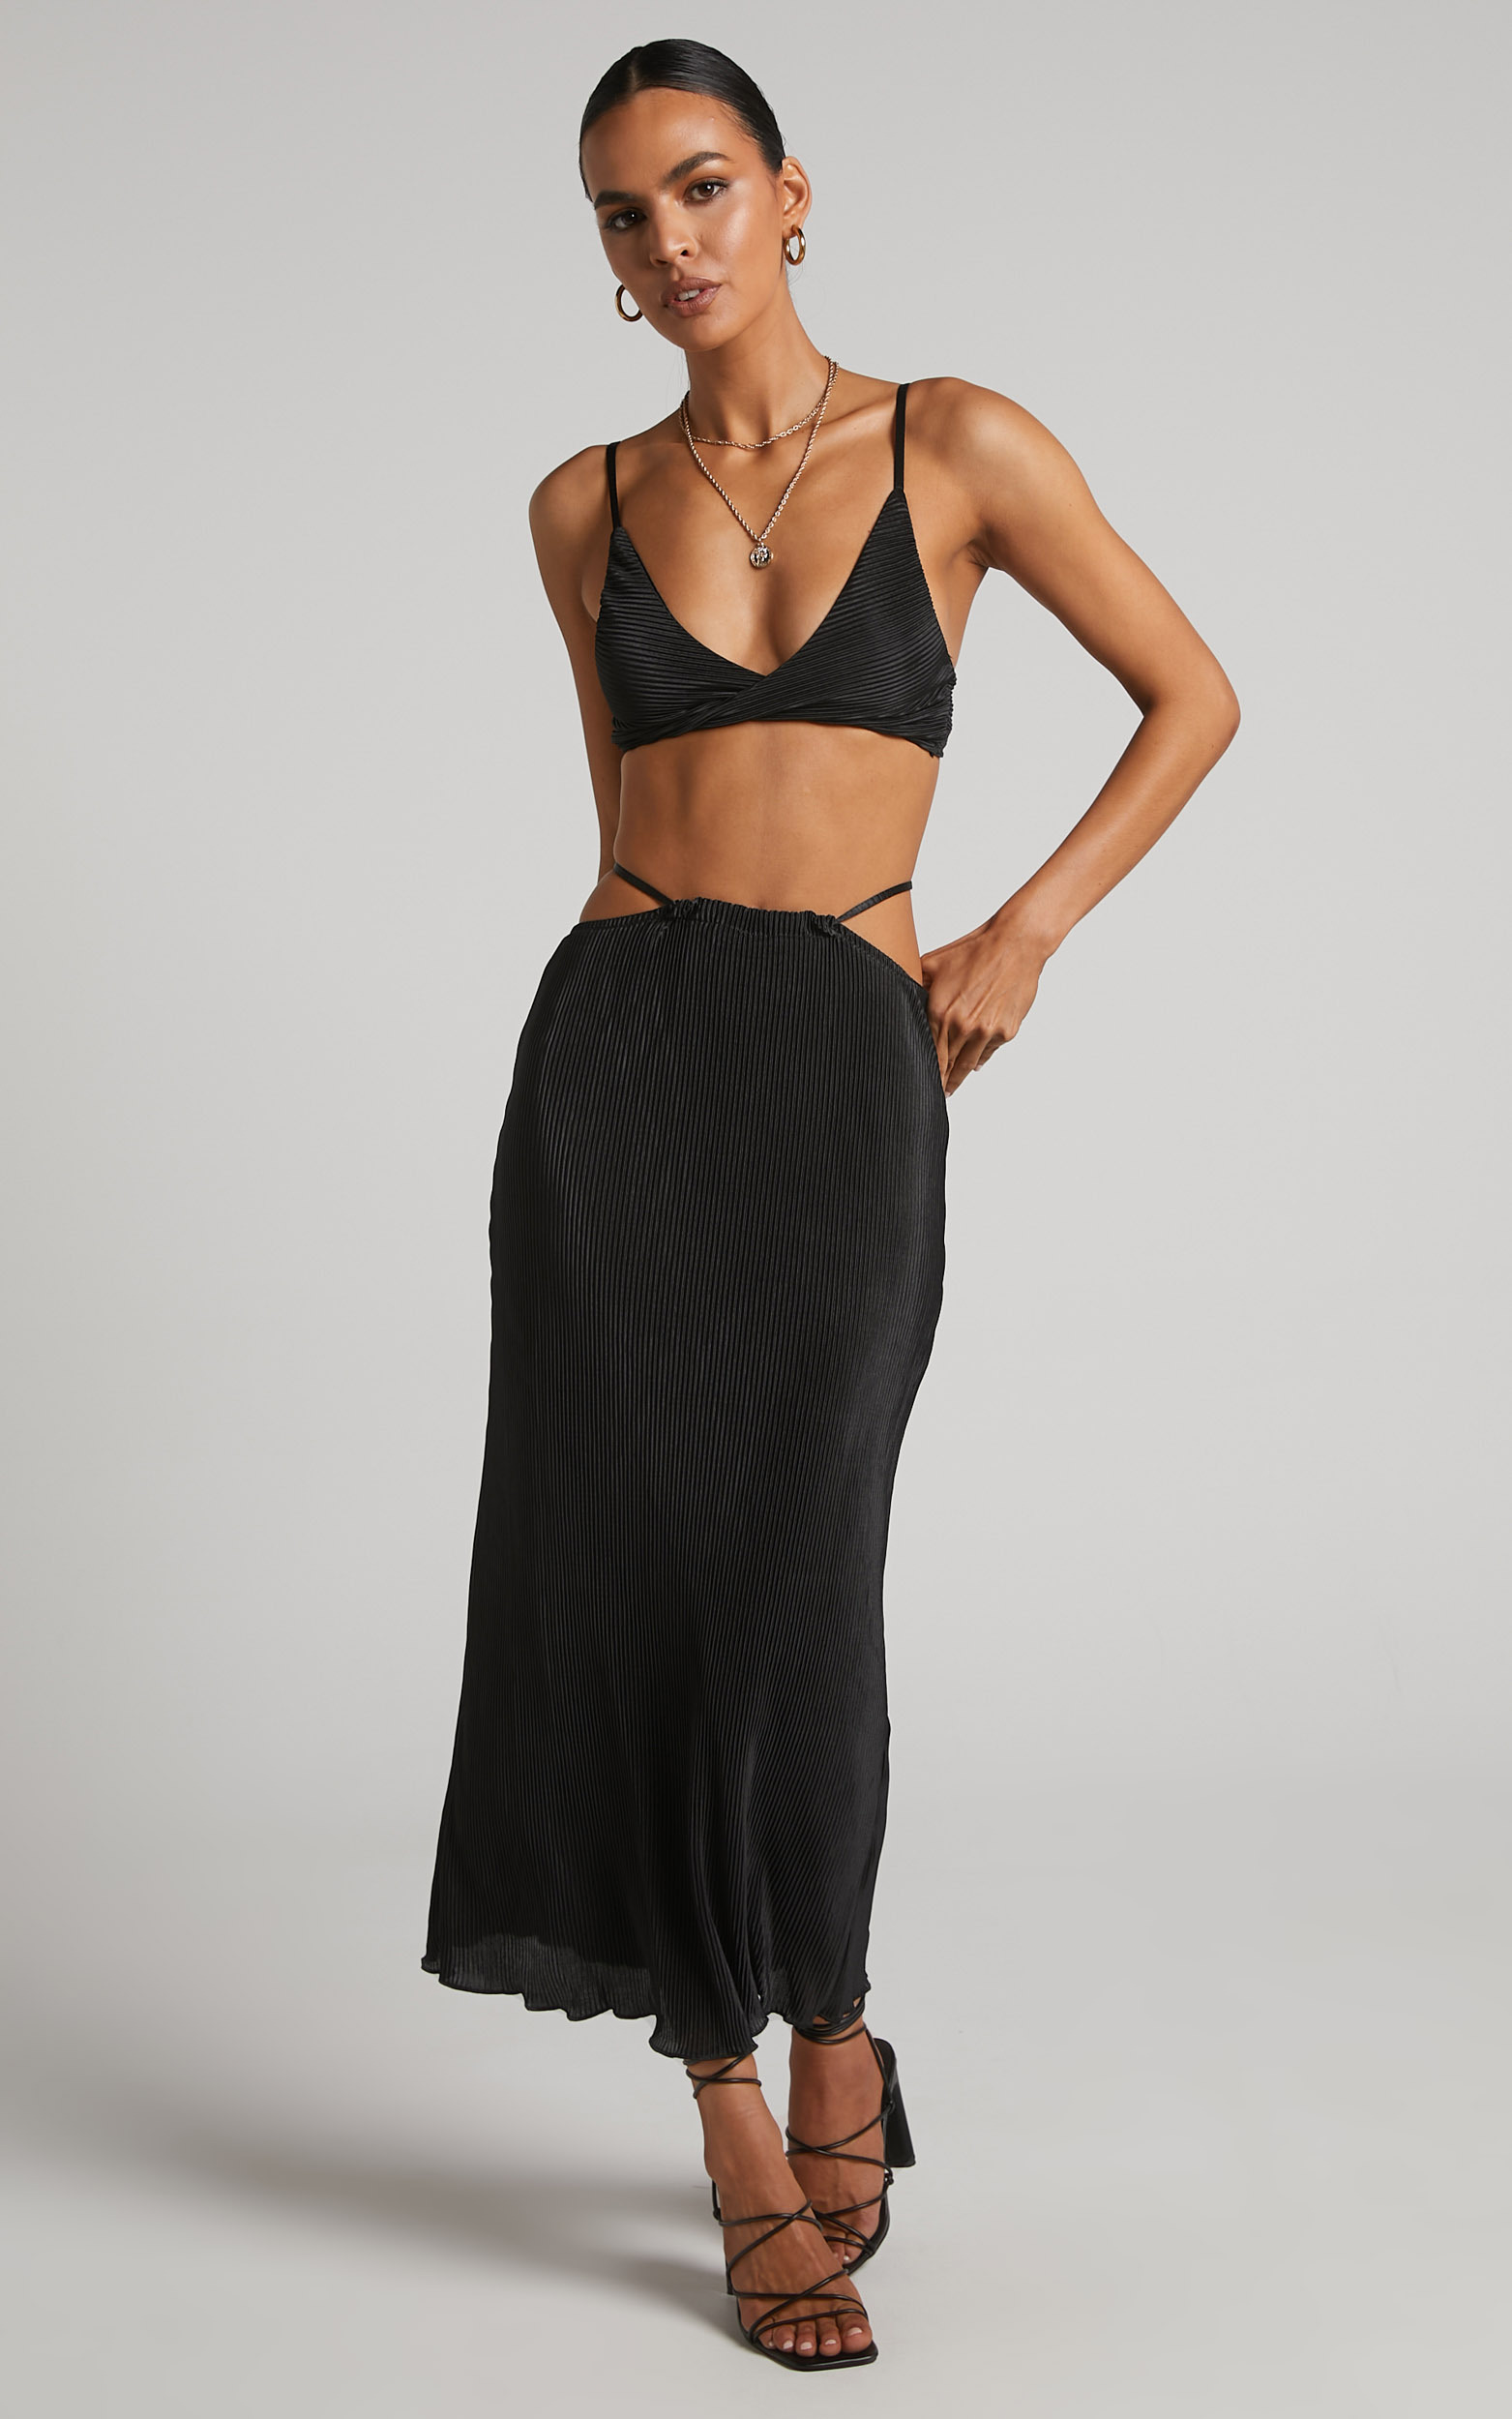 Elowen Two Piece Set - Plisse Twist Front Crop Top and Midi Skirt in Black - 04, BLK1, hi-res image number null